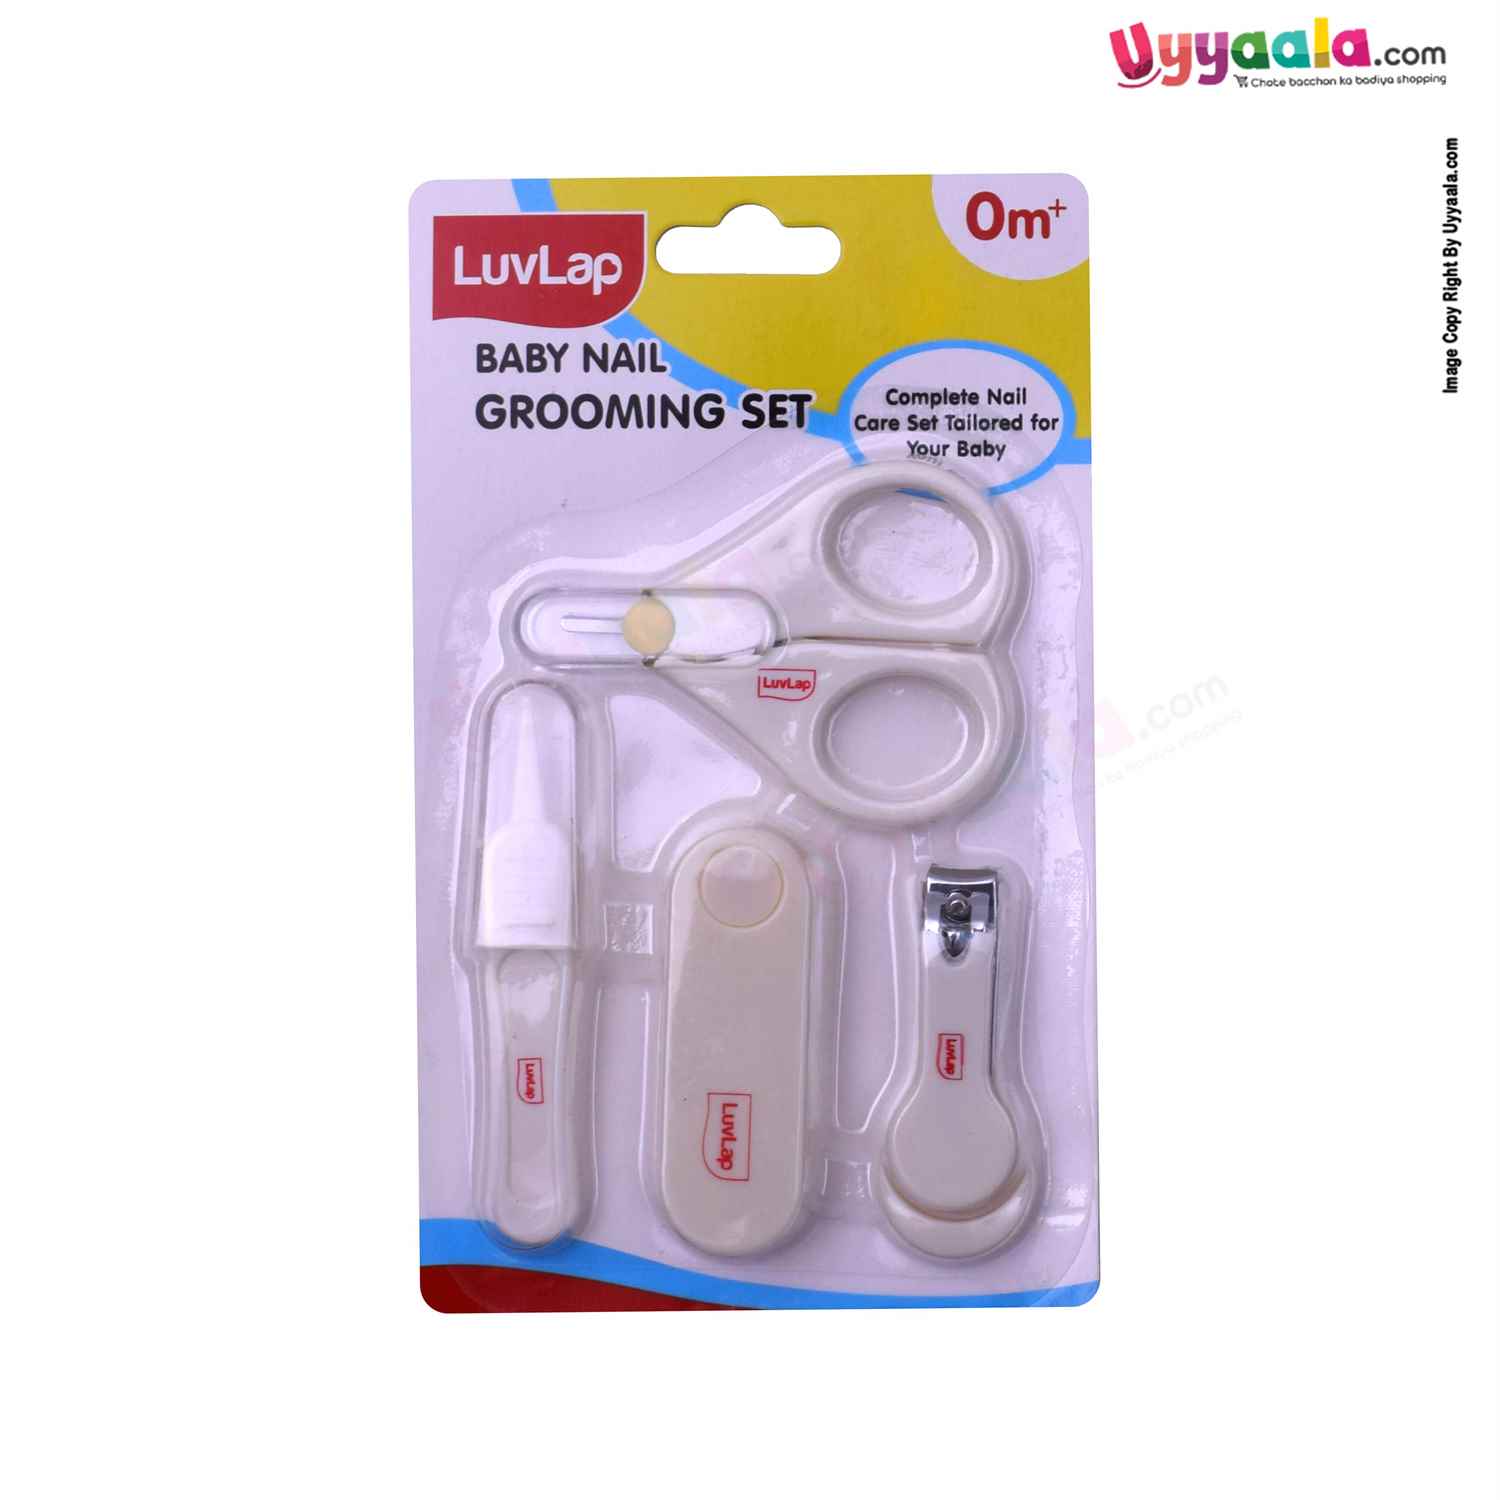 LUVLAP Baby Nail Grooming Set Complete Nail Care for your Baby 0+m Age, White